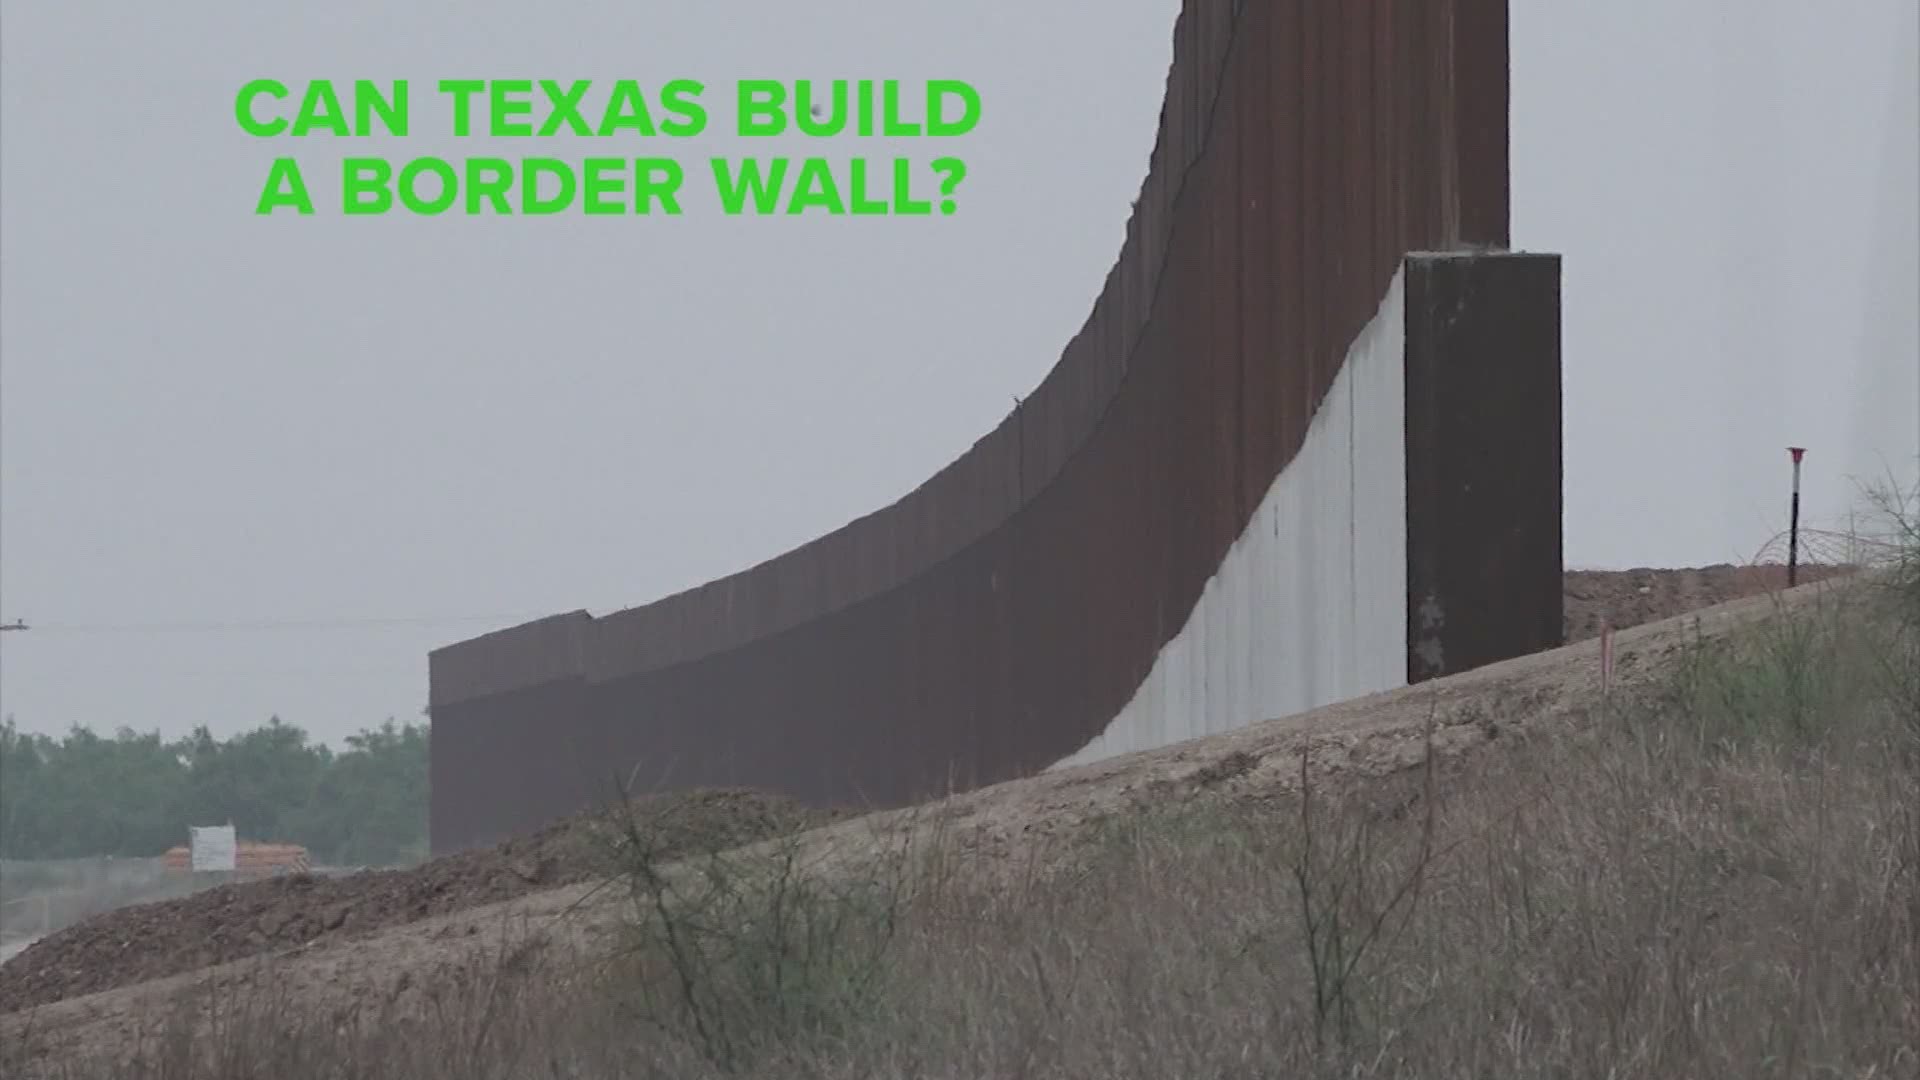 Two law professors said Gov. Abbott faces several hurdles in clearing the way for Texas to acquire the land necessary to build a border wall.